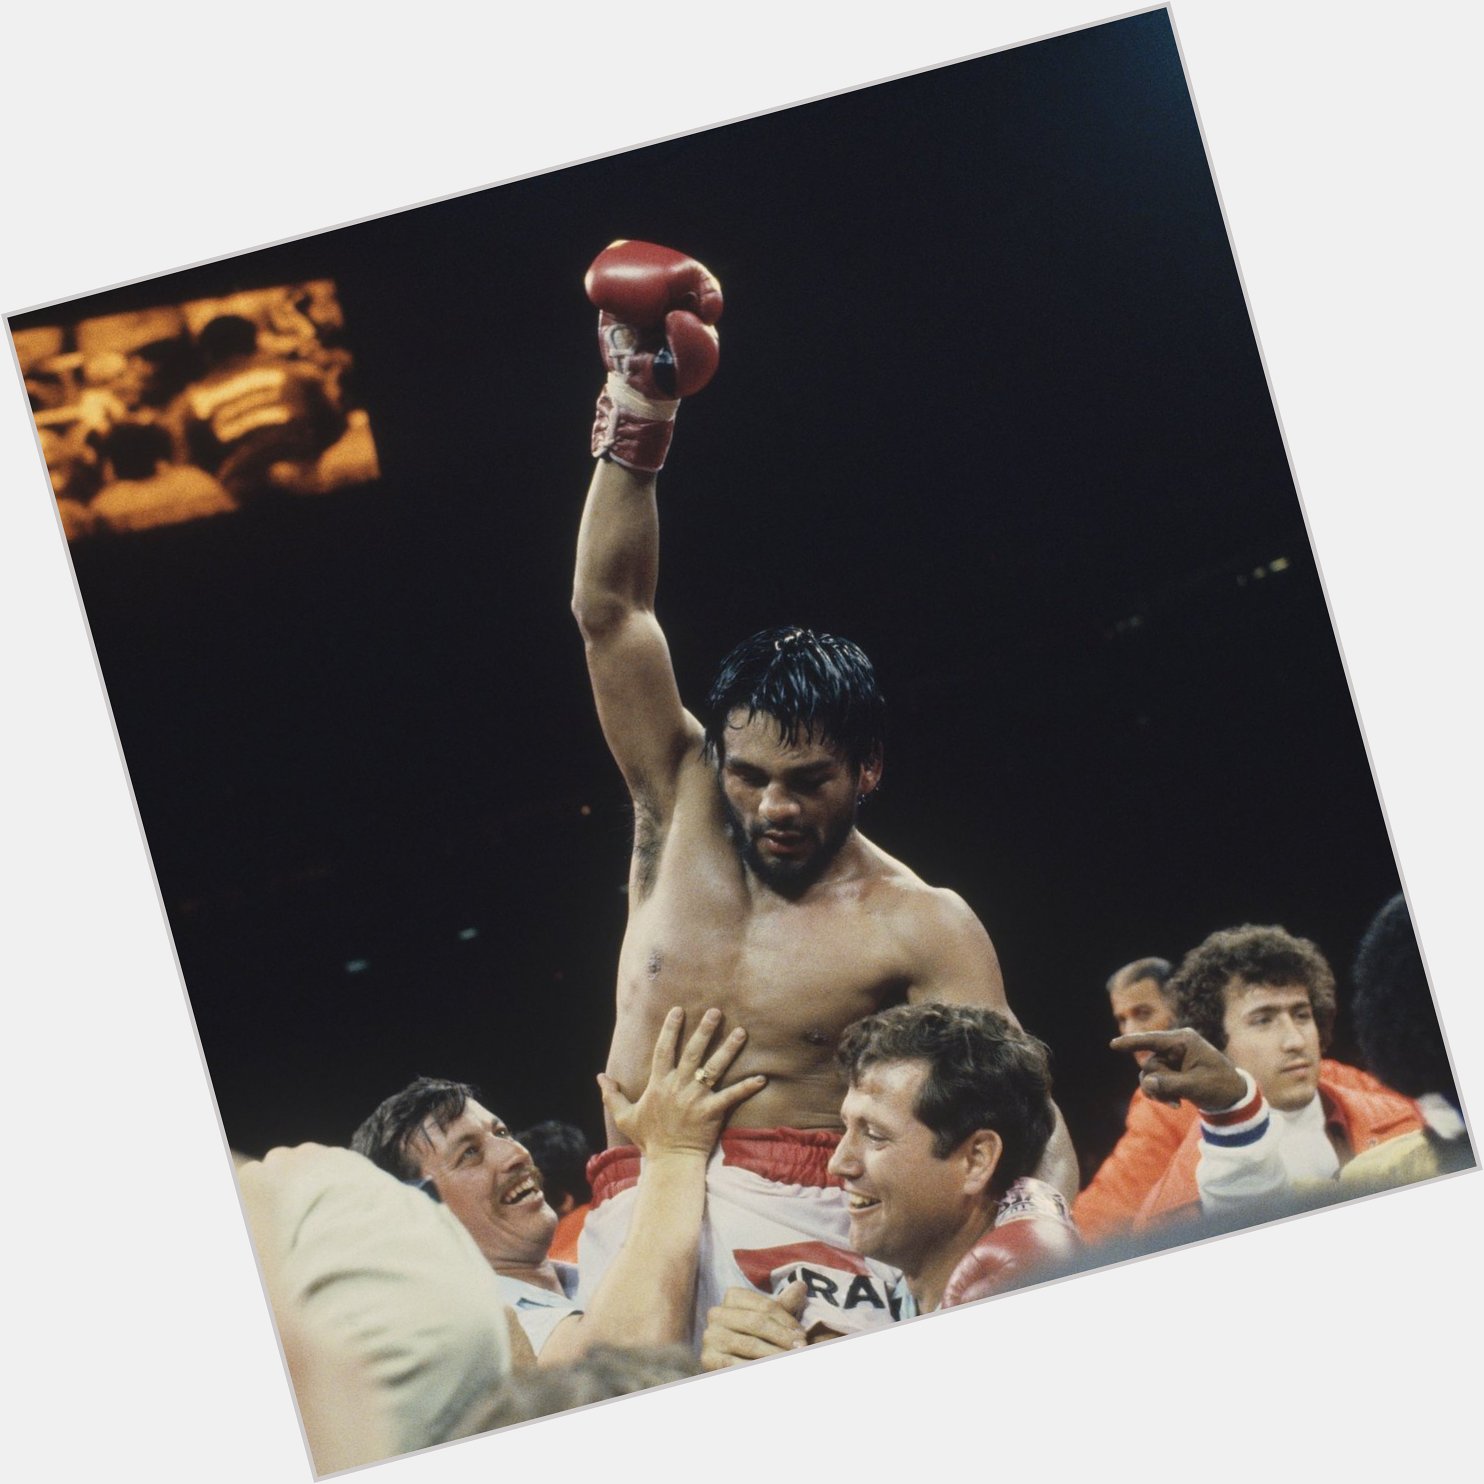 Happy birthday to \hands of Stone\ Roberto Duran.The greatest of all time 